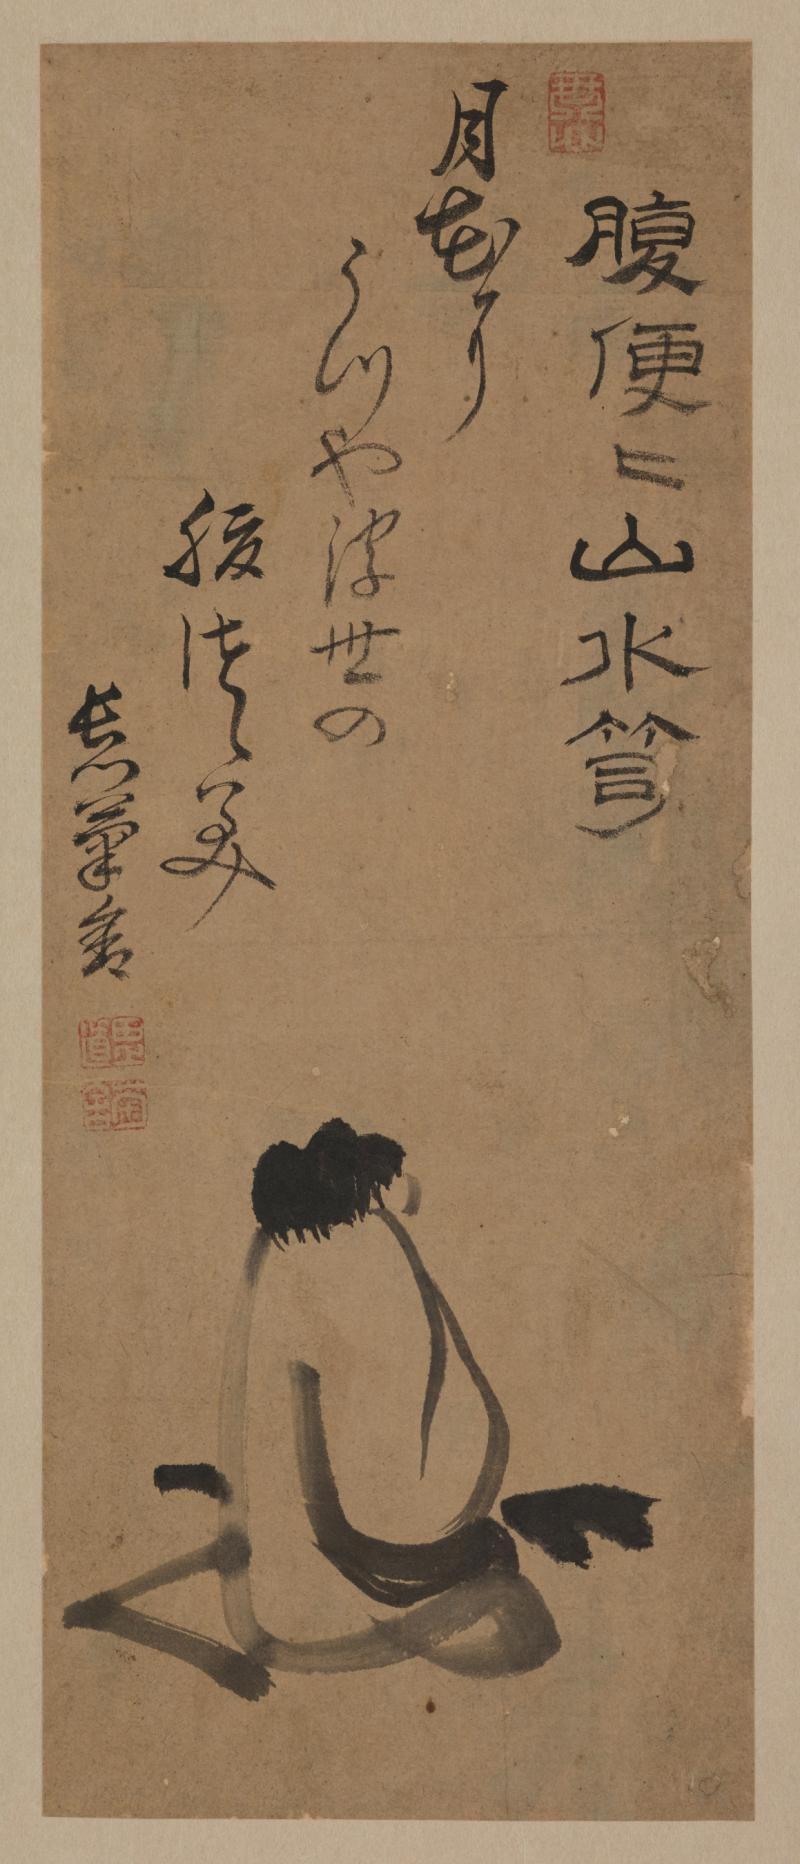 Hanging scroll depicting a lonely man sitting on the ground